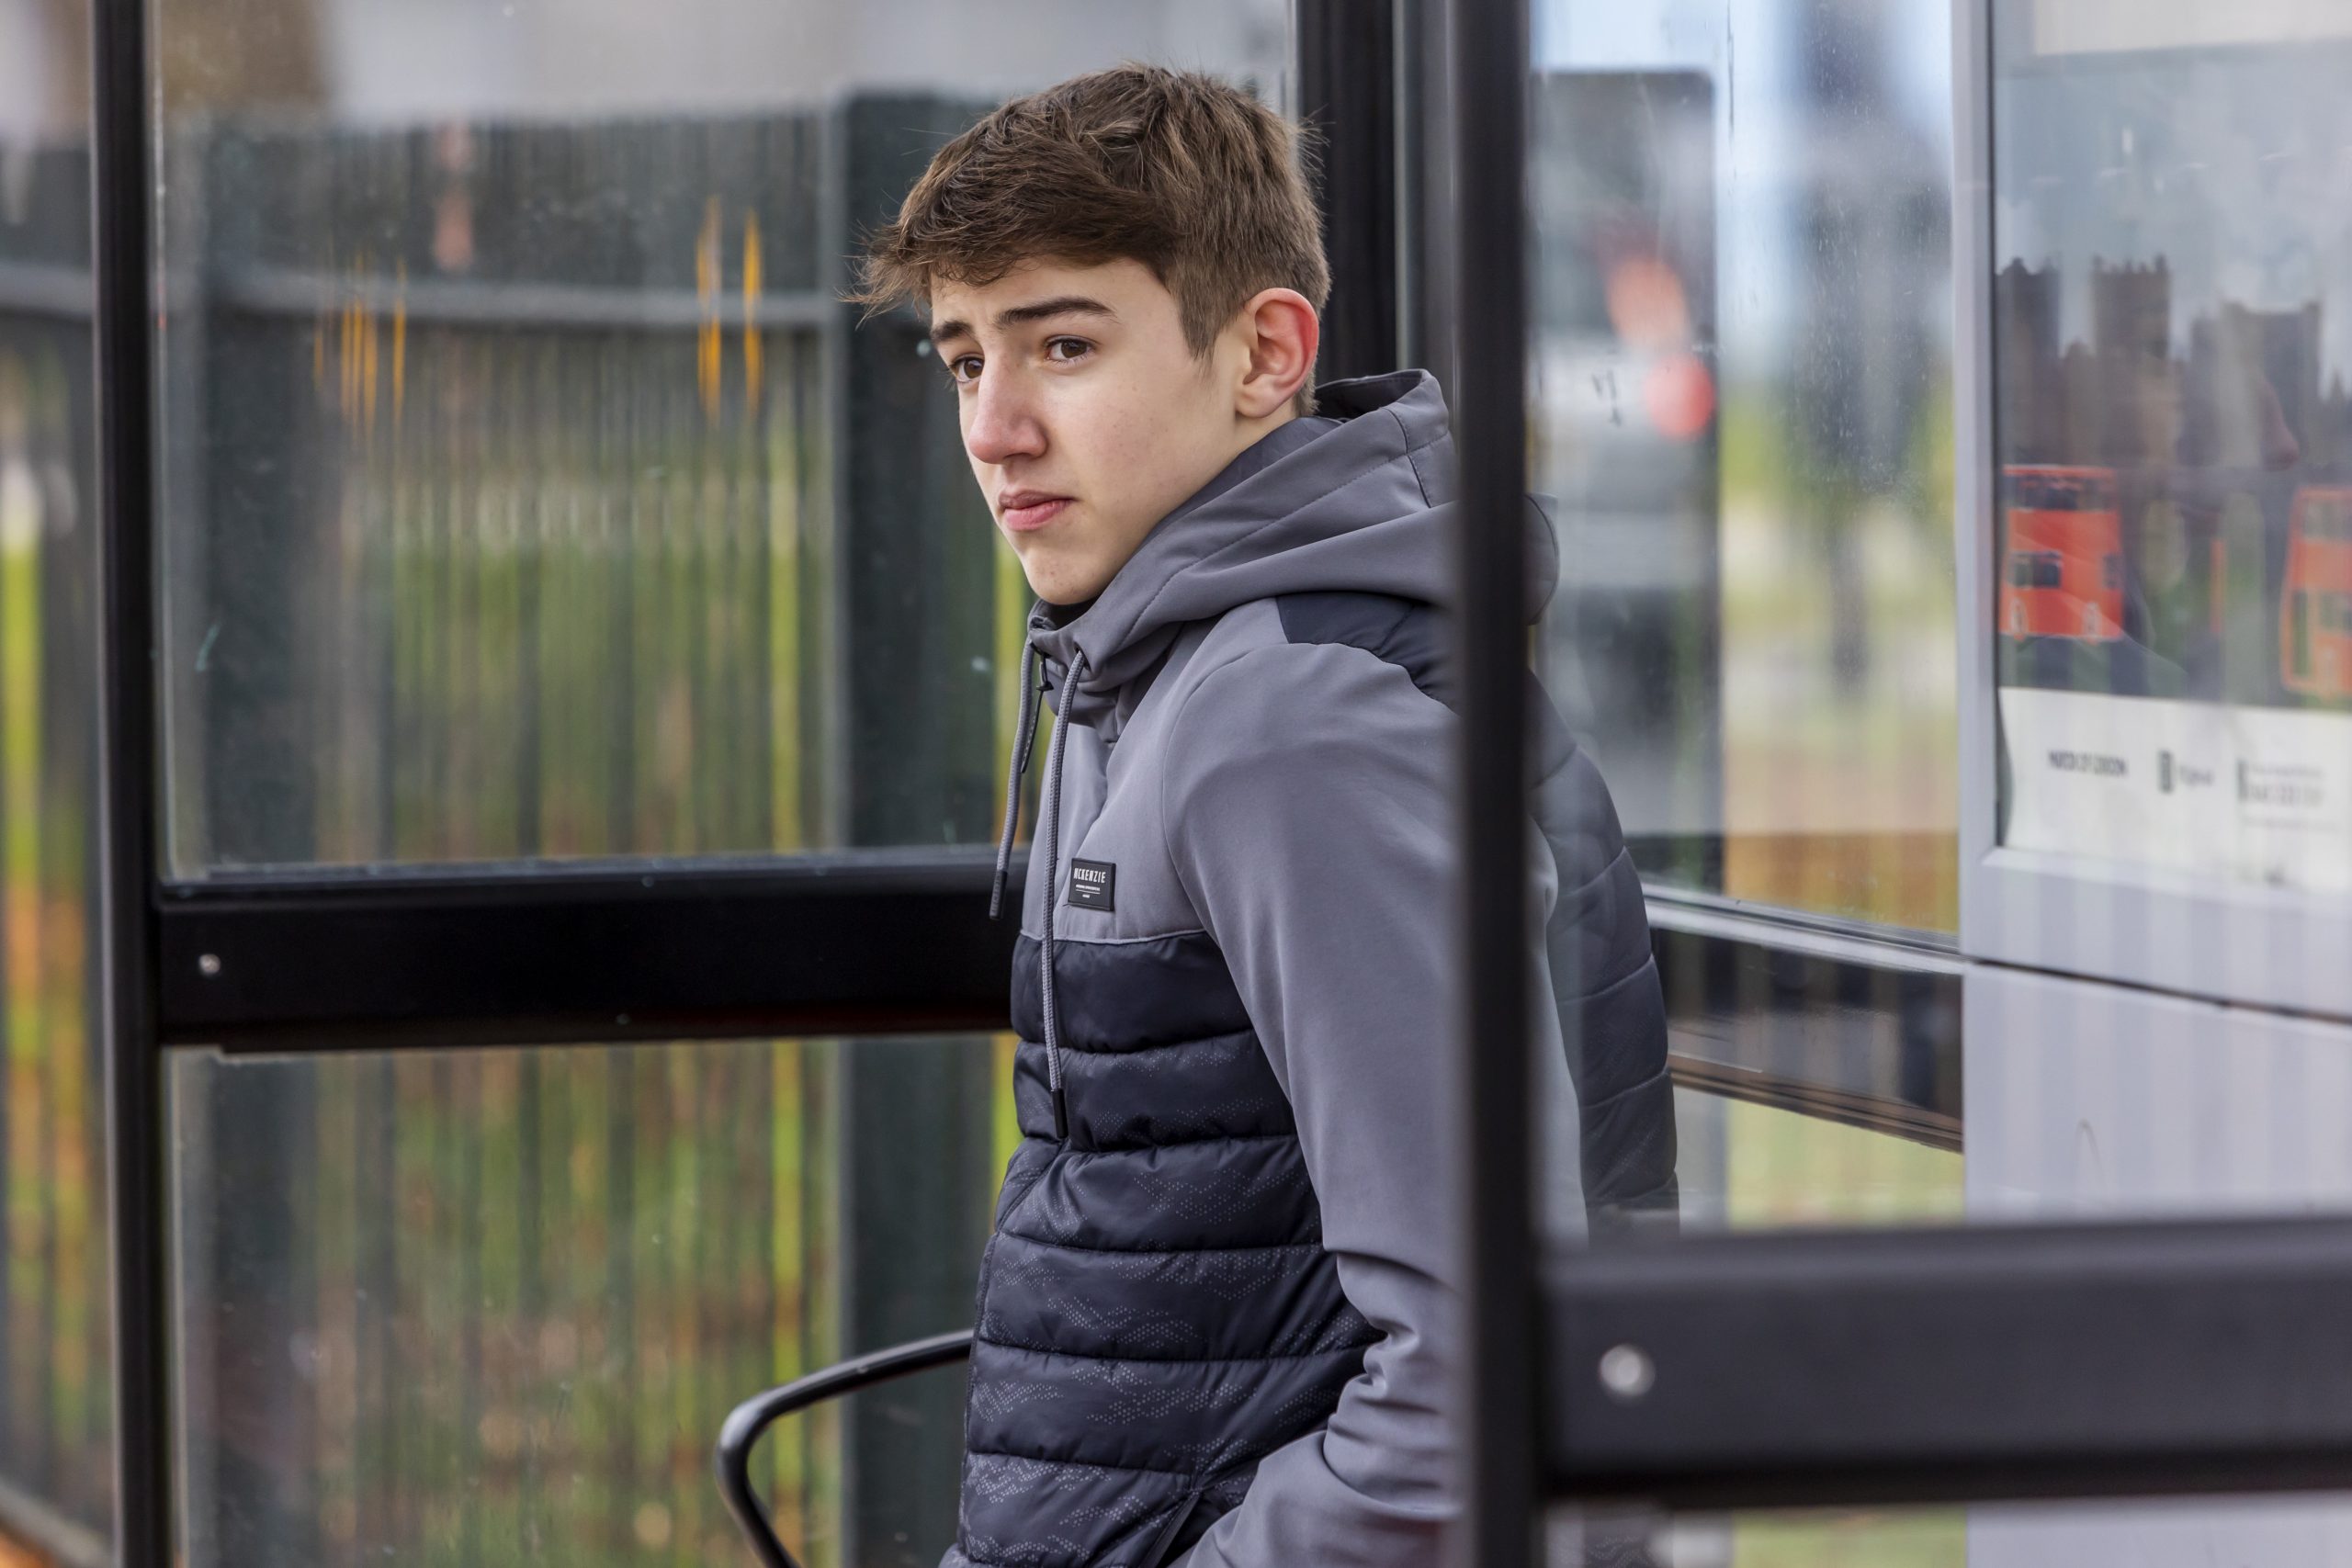 A young person is sitting at a bus stop wondering what happens when your family move away